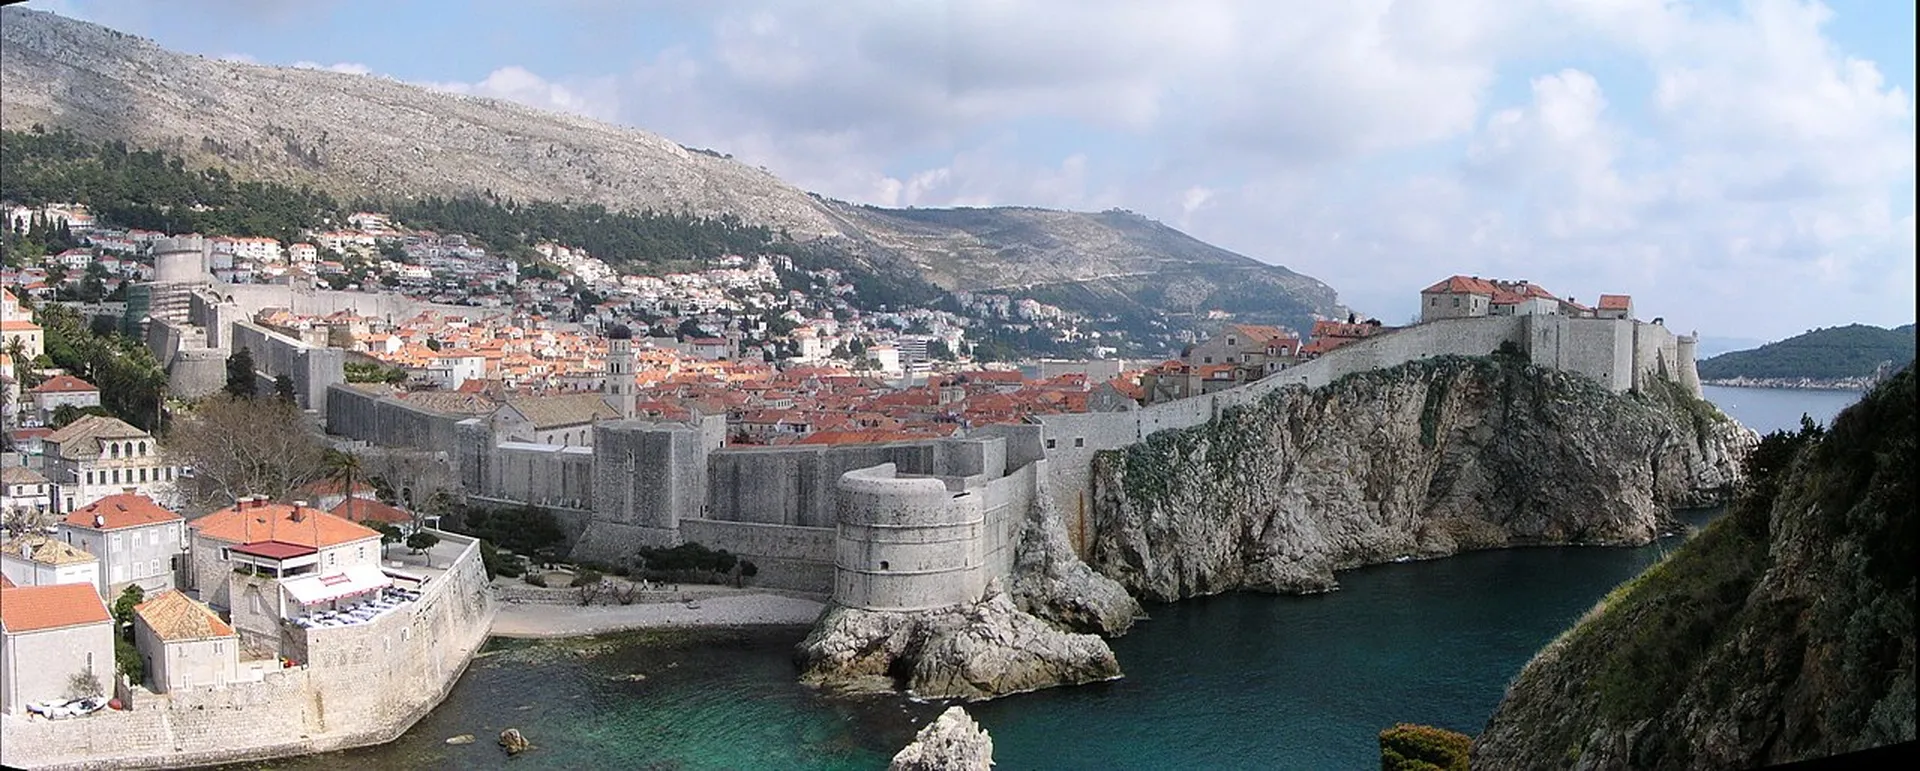 Old Town & Walls of Dubrovnik